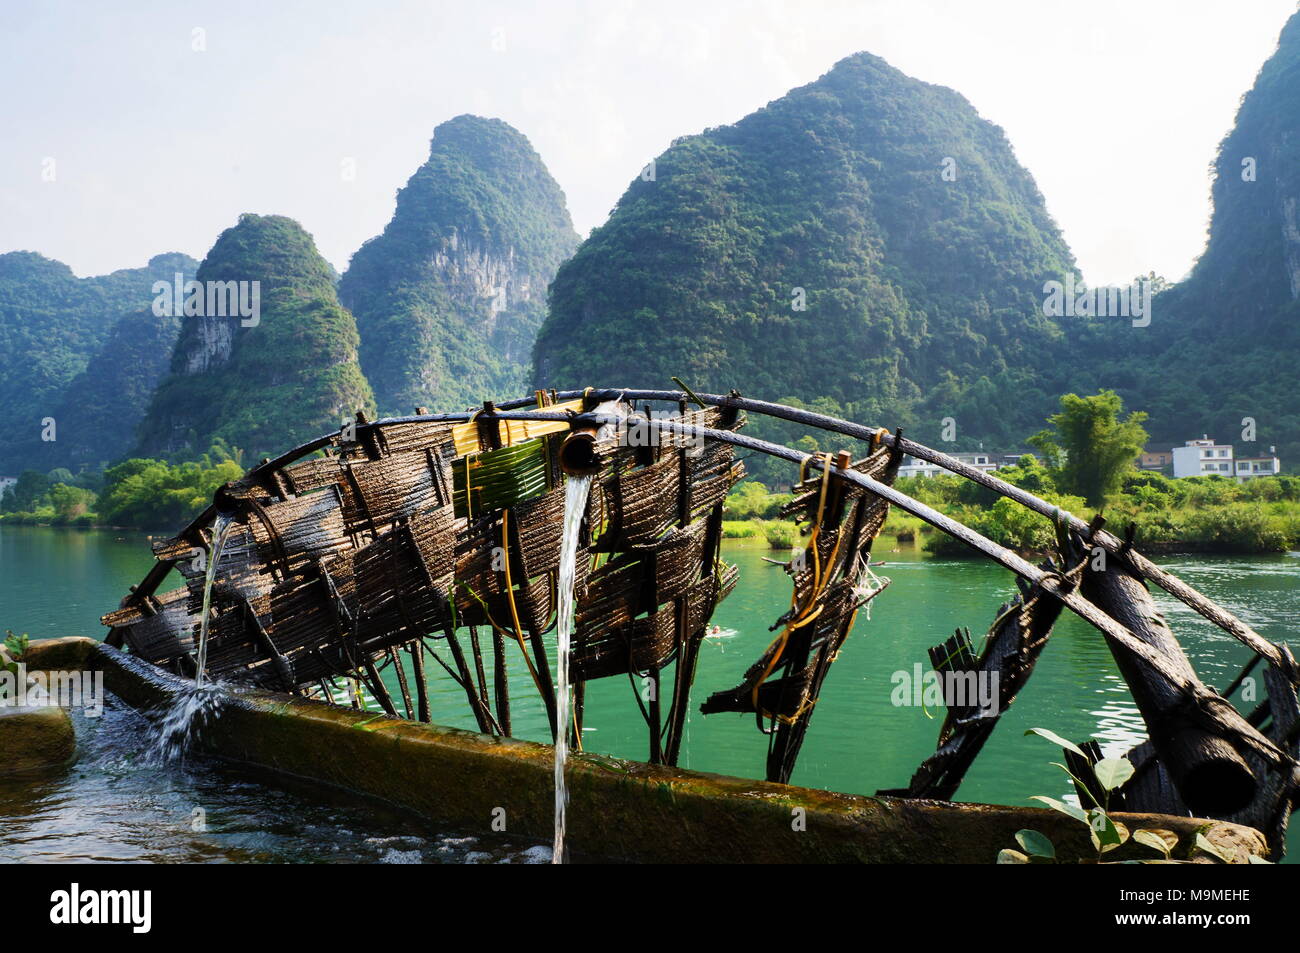 Old wooden water mill in Yangshuo Li river with karst scenery Stock Photo